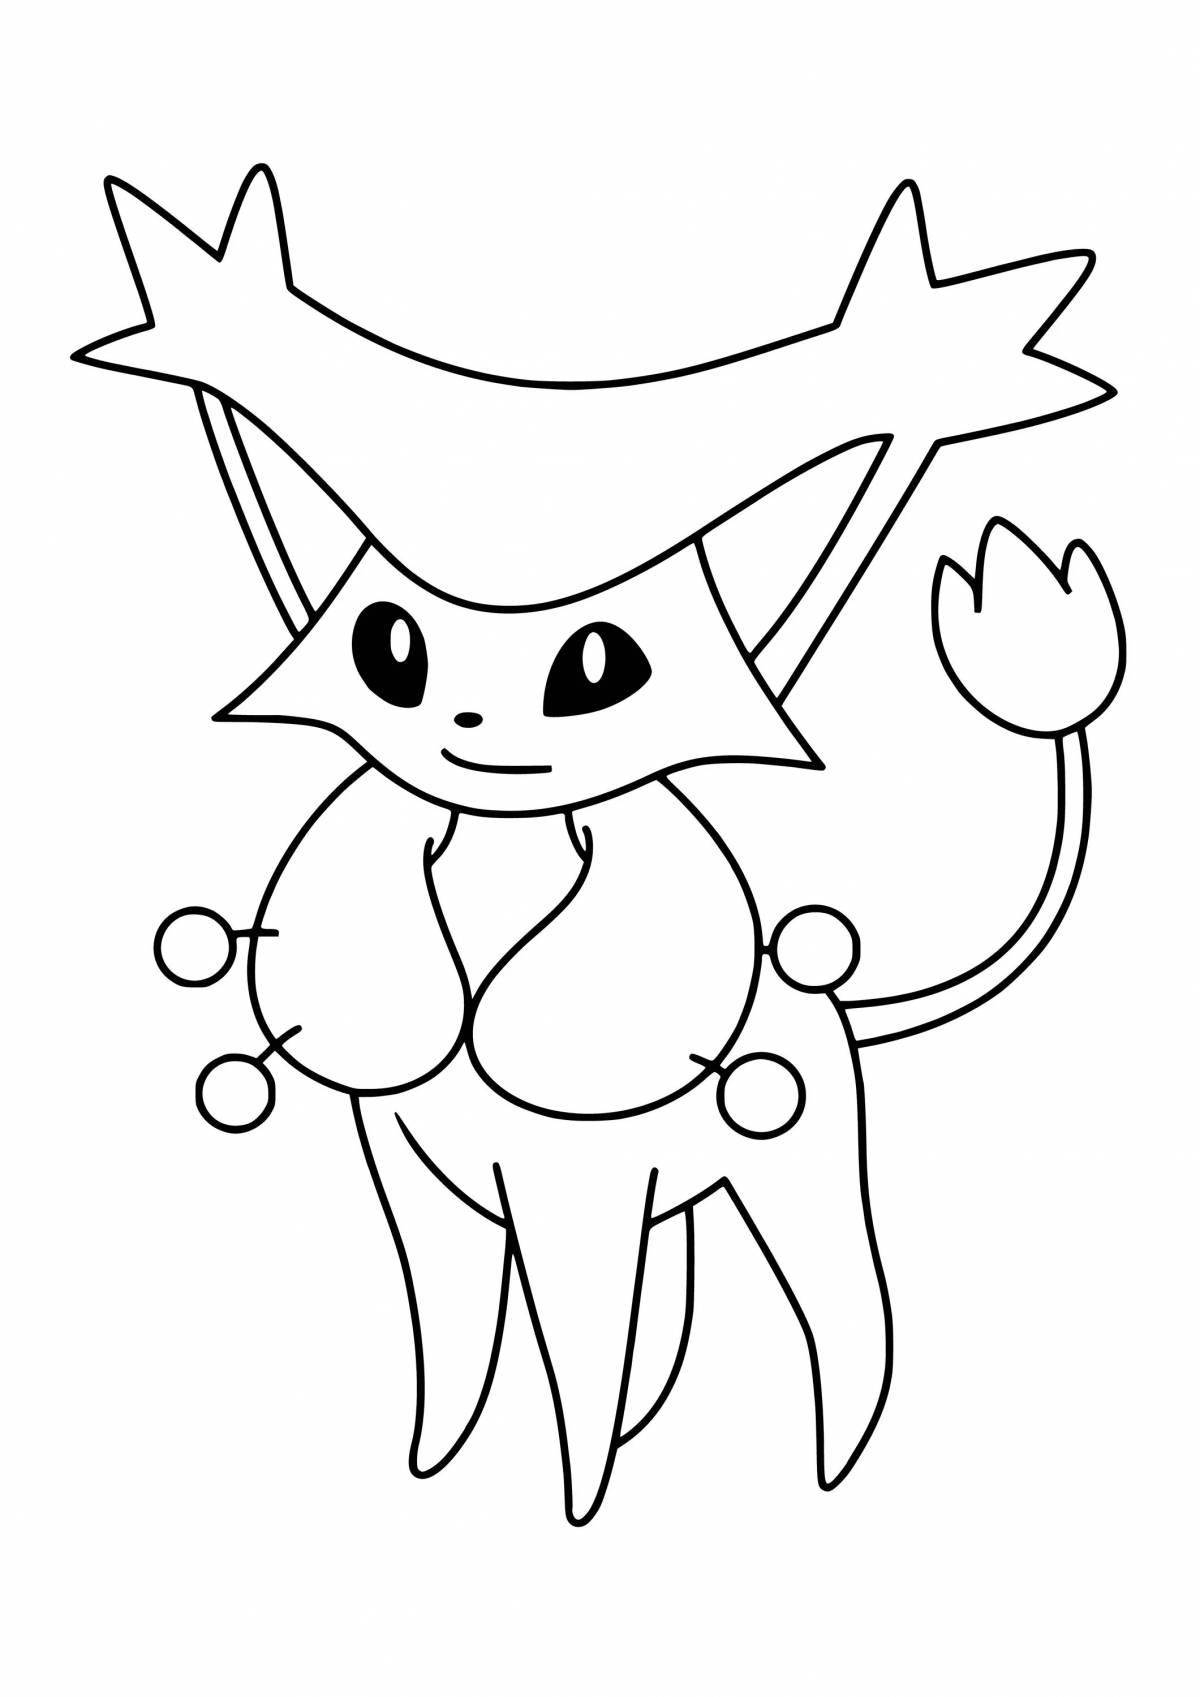 Cute pokemon coloring pages for kids